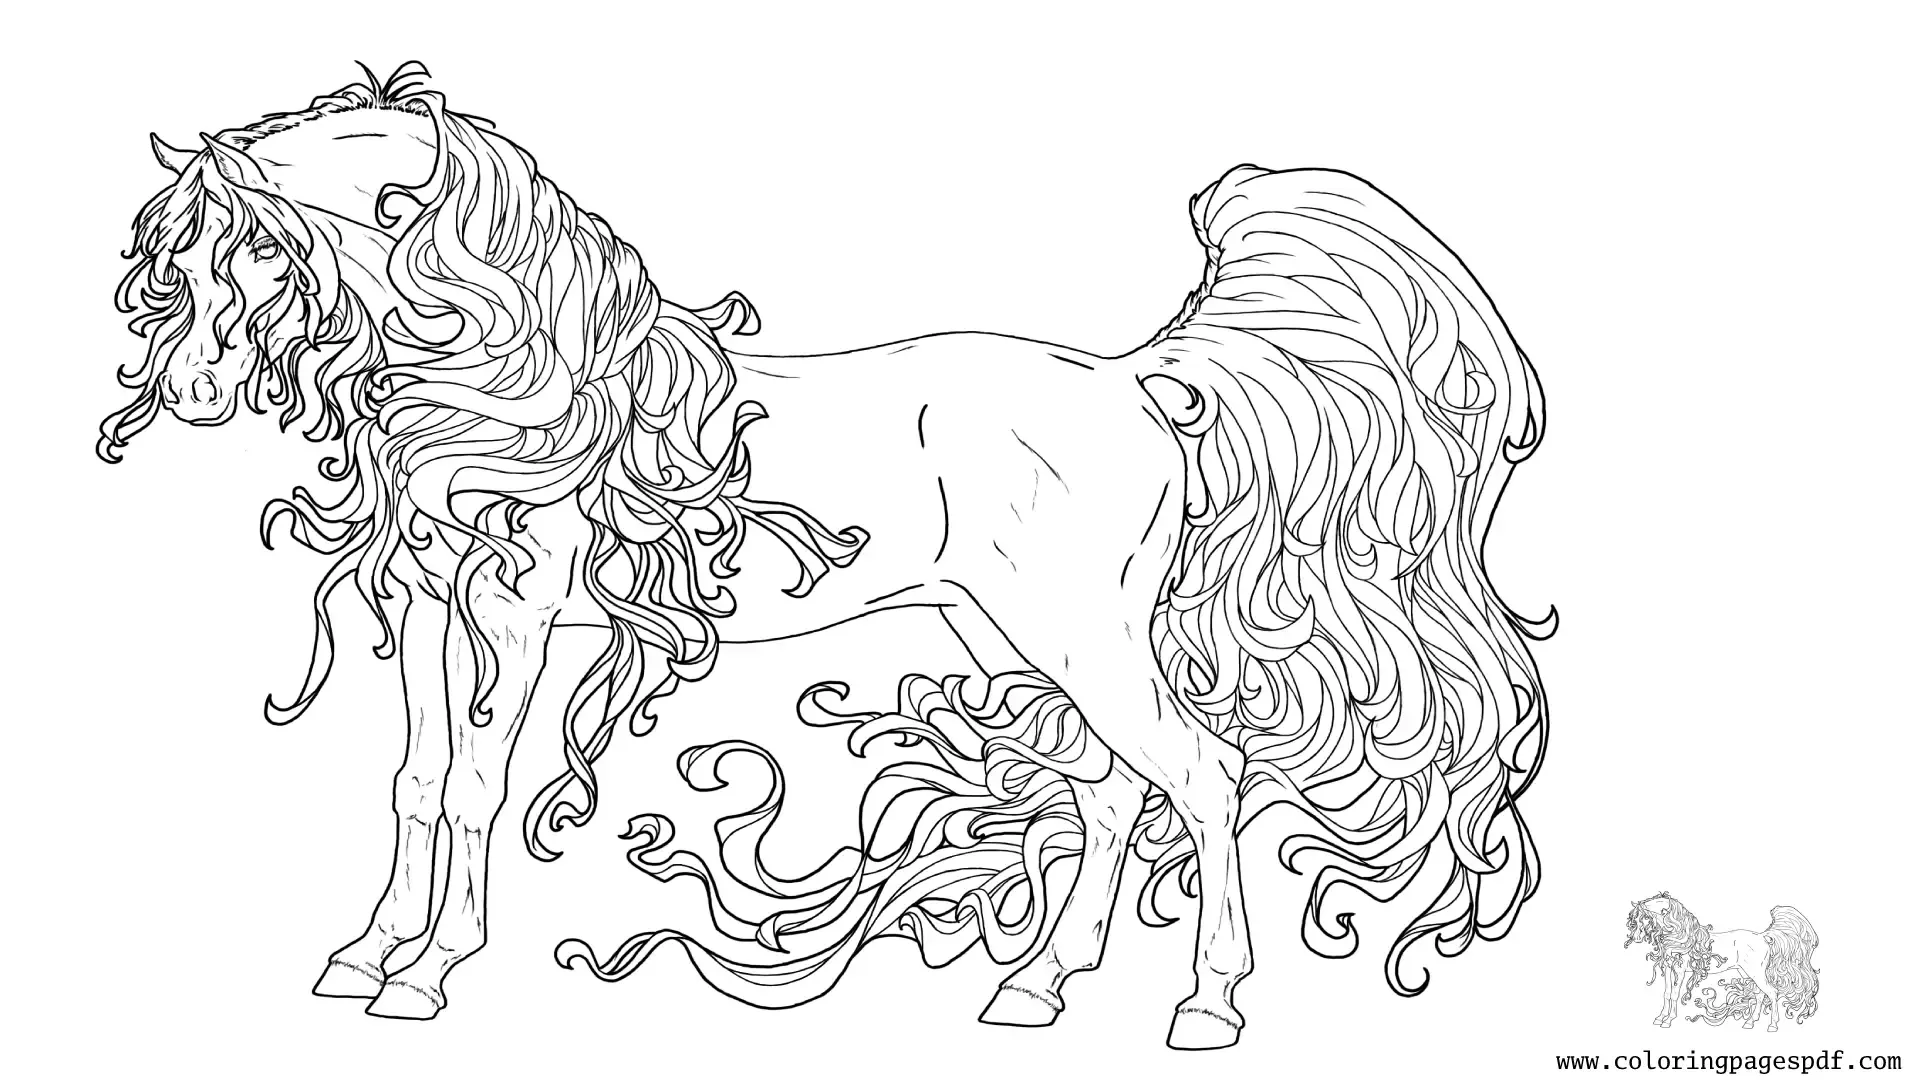 Coloring Page Of A Horse With Really Long Hair